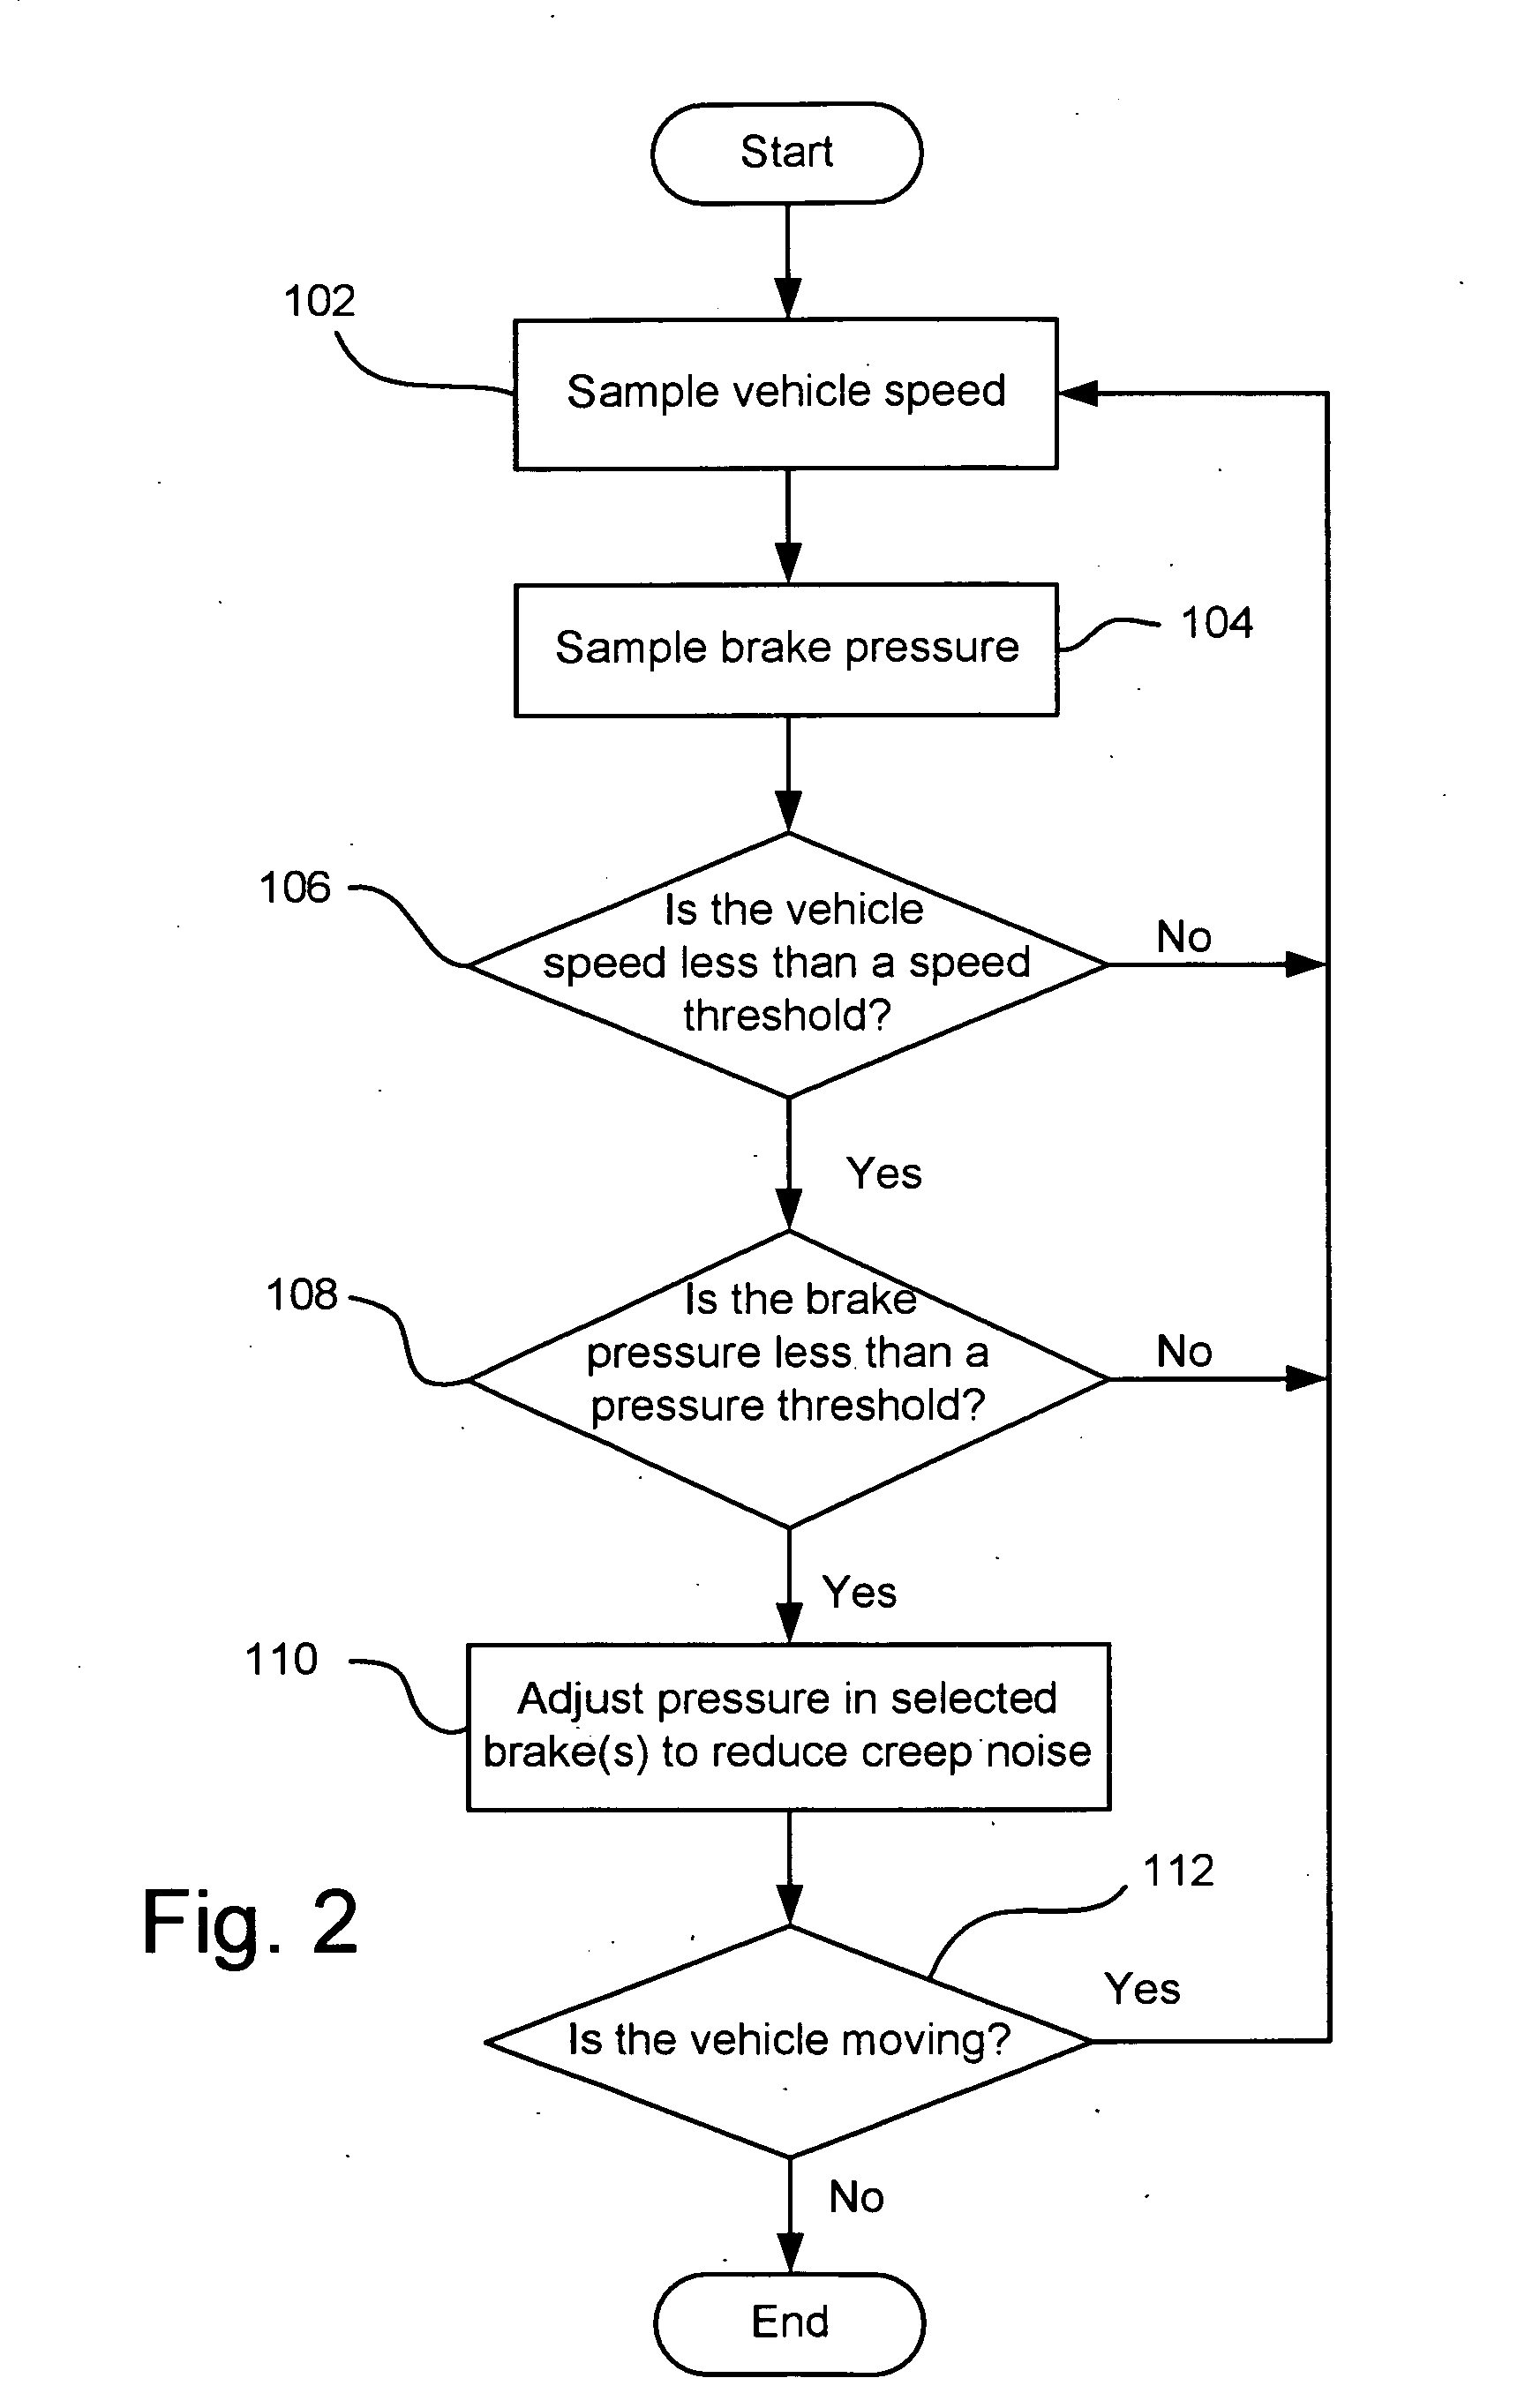 Method and system for reducing vehicle brake creep noise